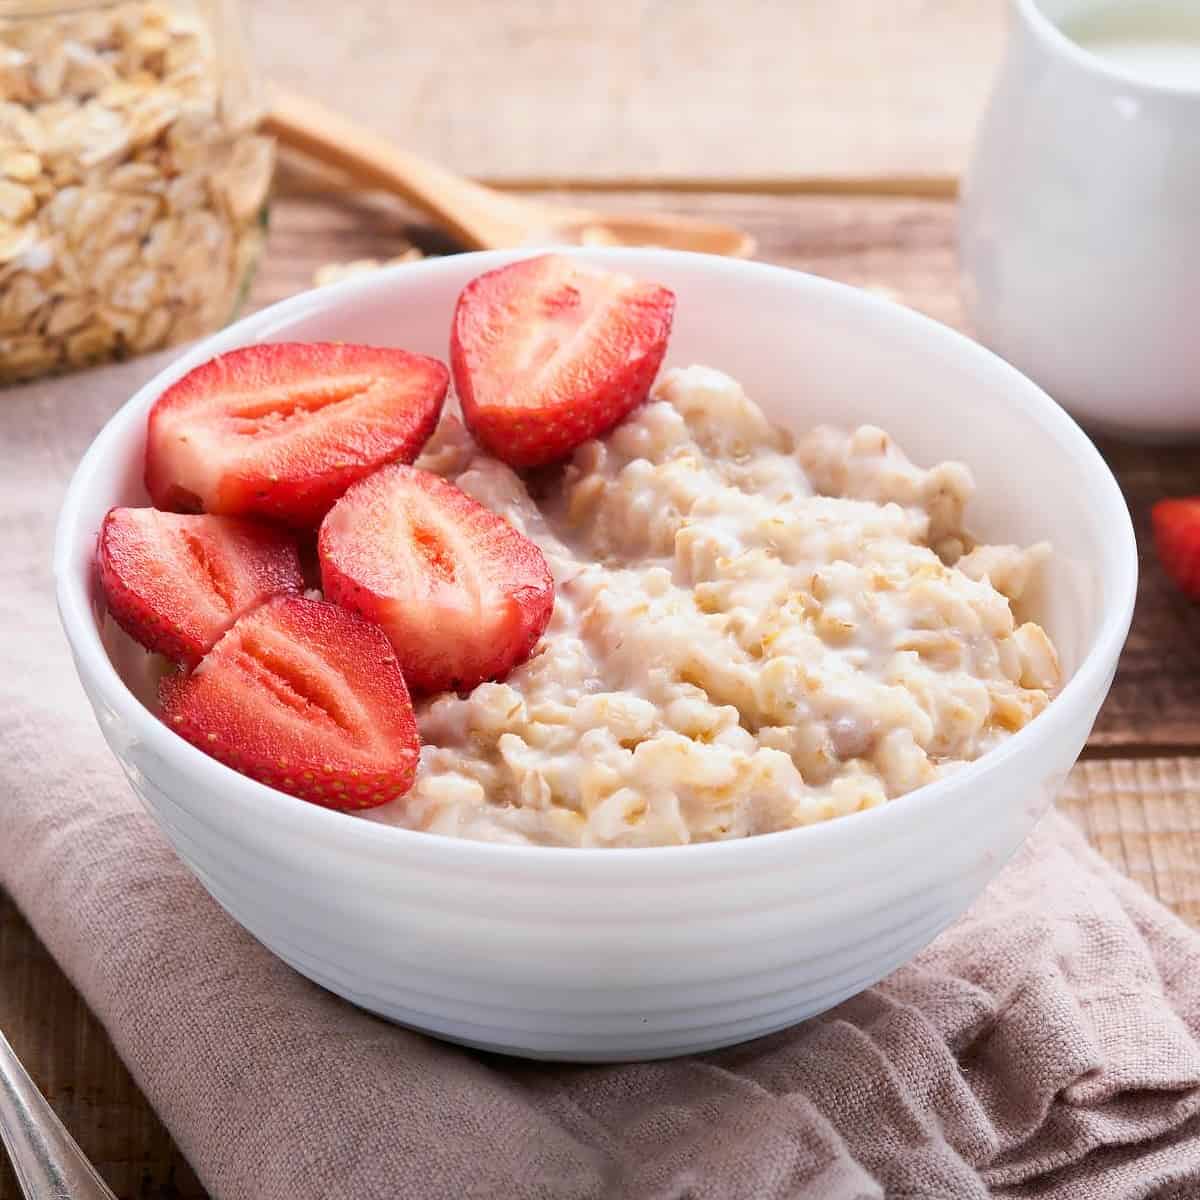 Bowl with oatmeal and strawberries halves.